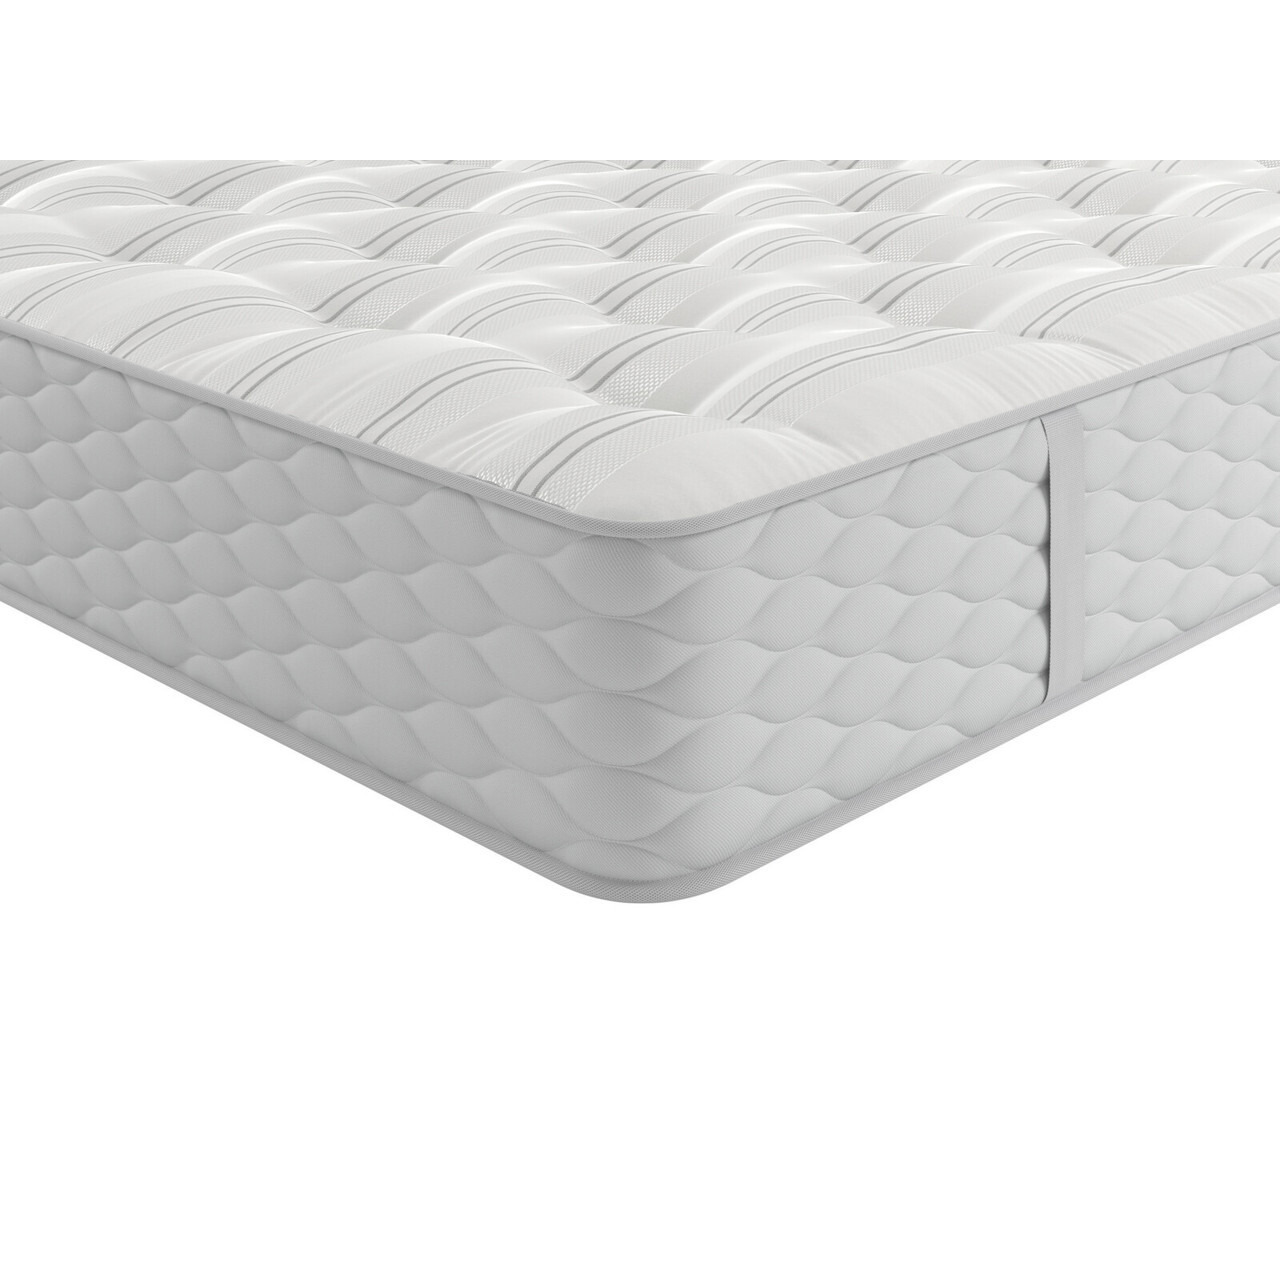 Sealy Fremont Backcare Firm Support Mattress - image 1